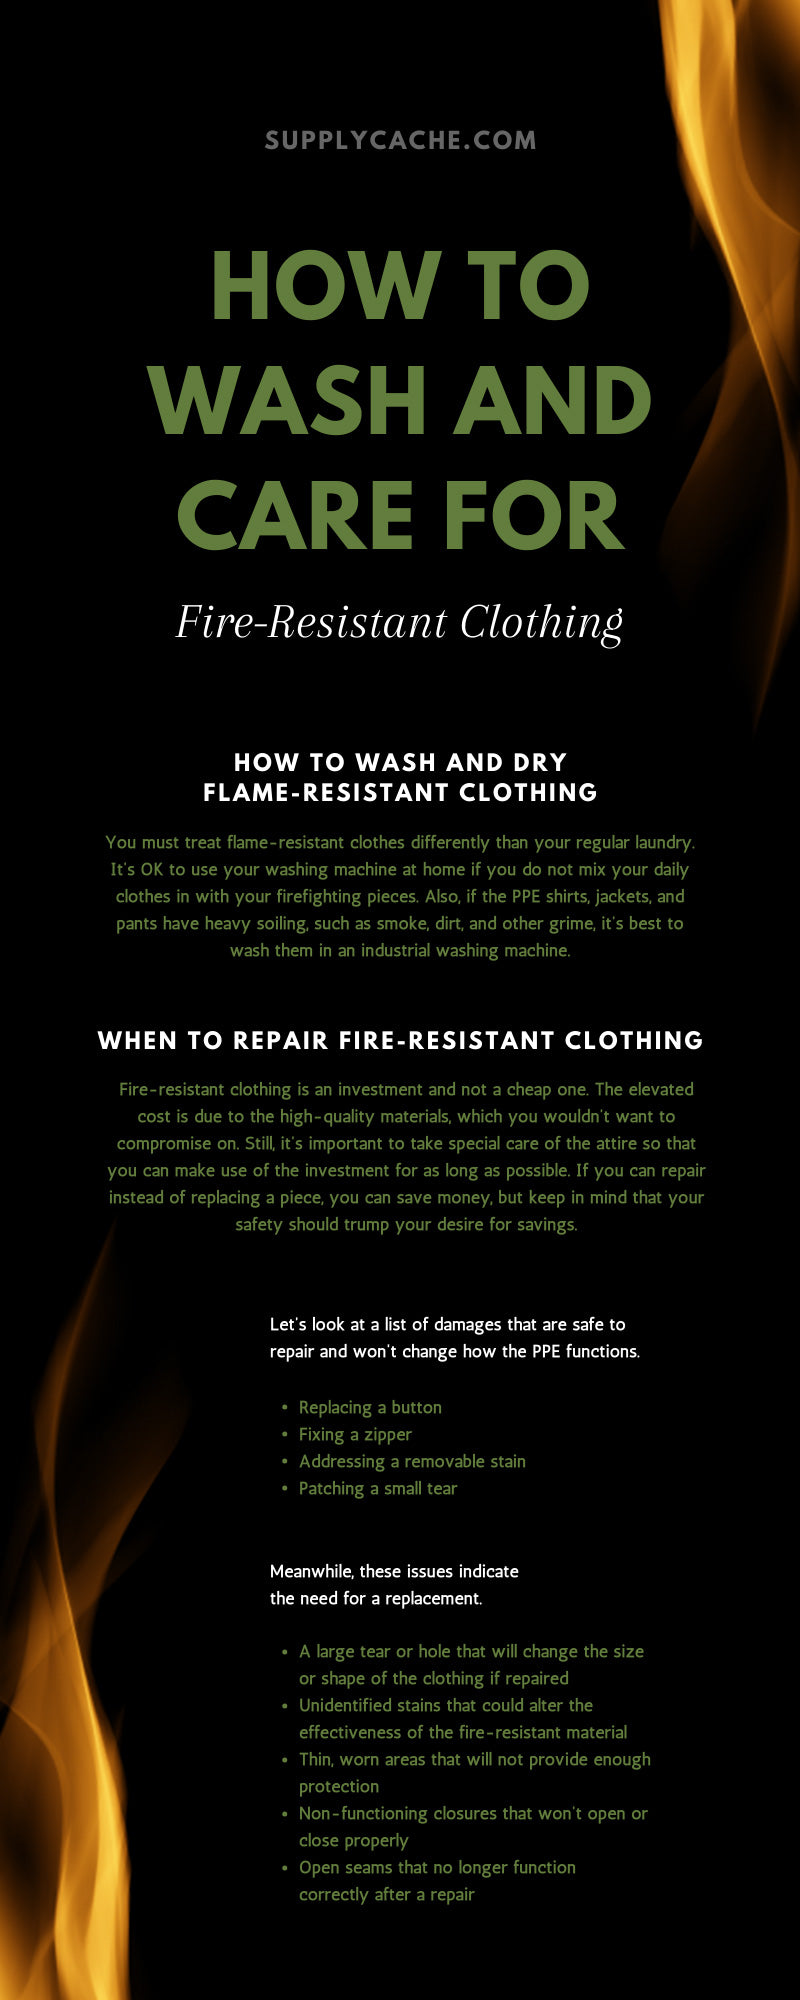 How To Wash and Care for Fire-Resistant Clothing